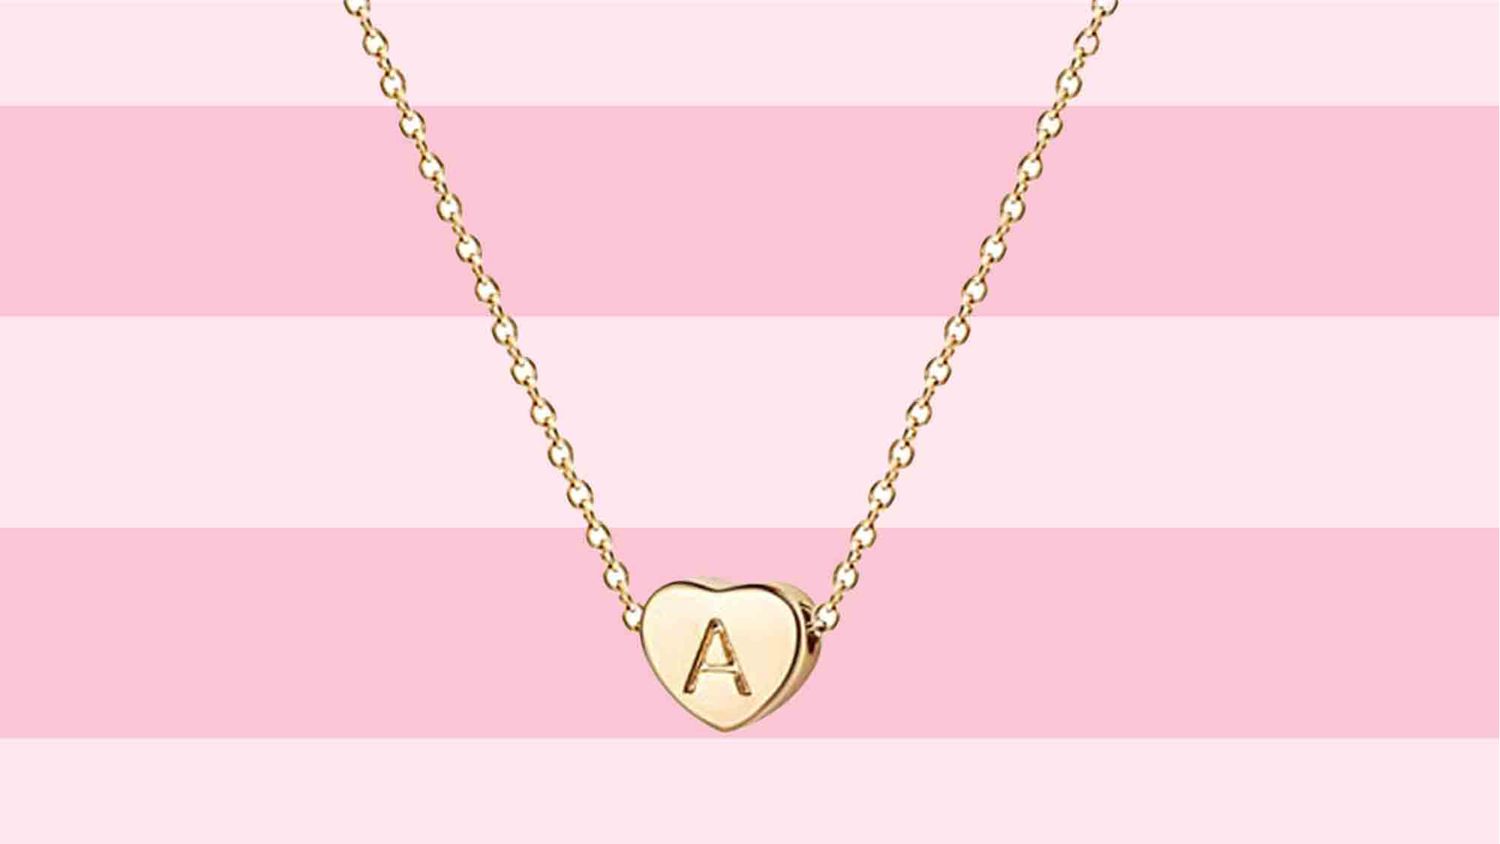 This Simple Initial Heart Necklace Is 